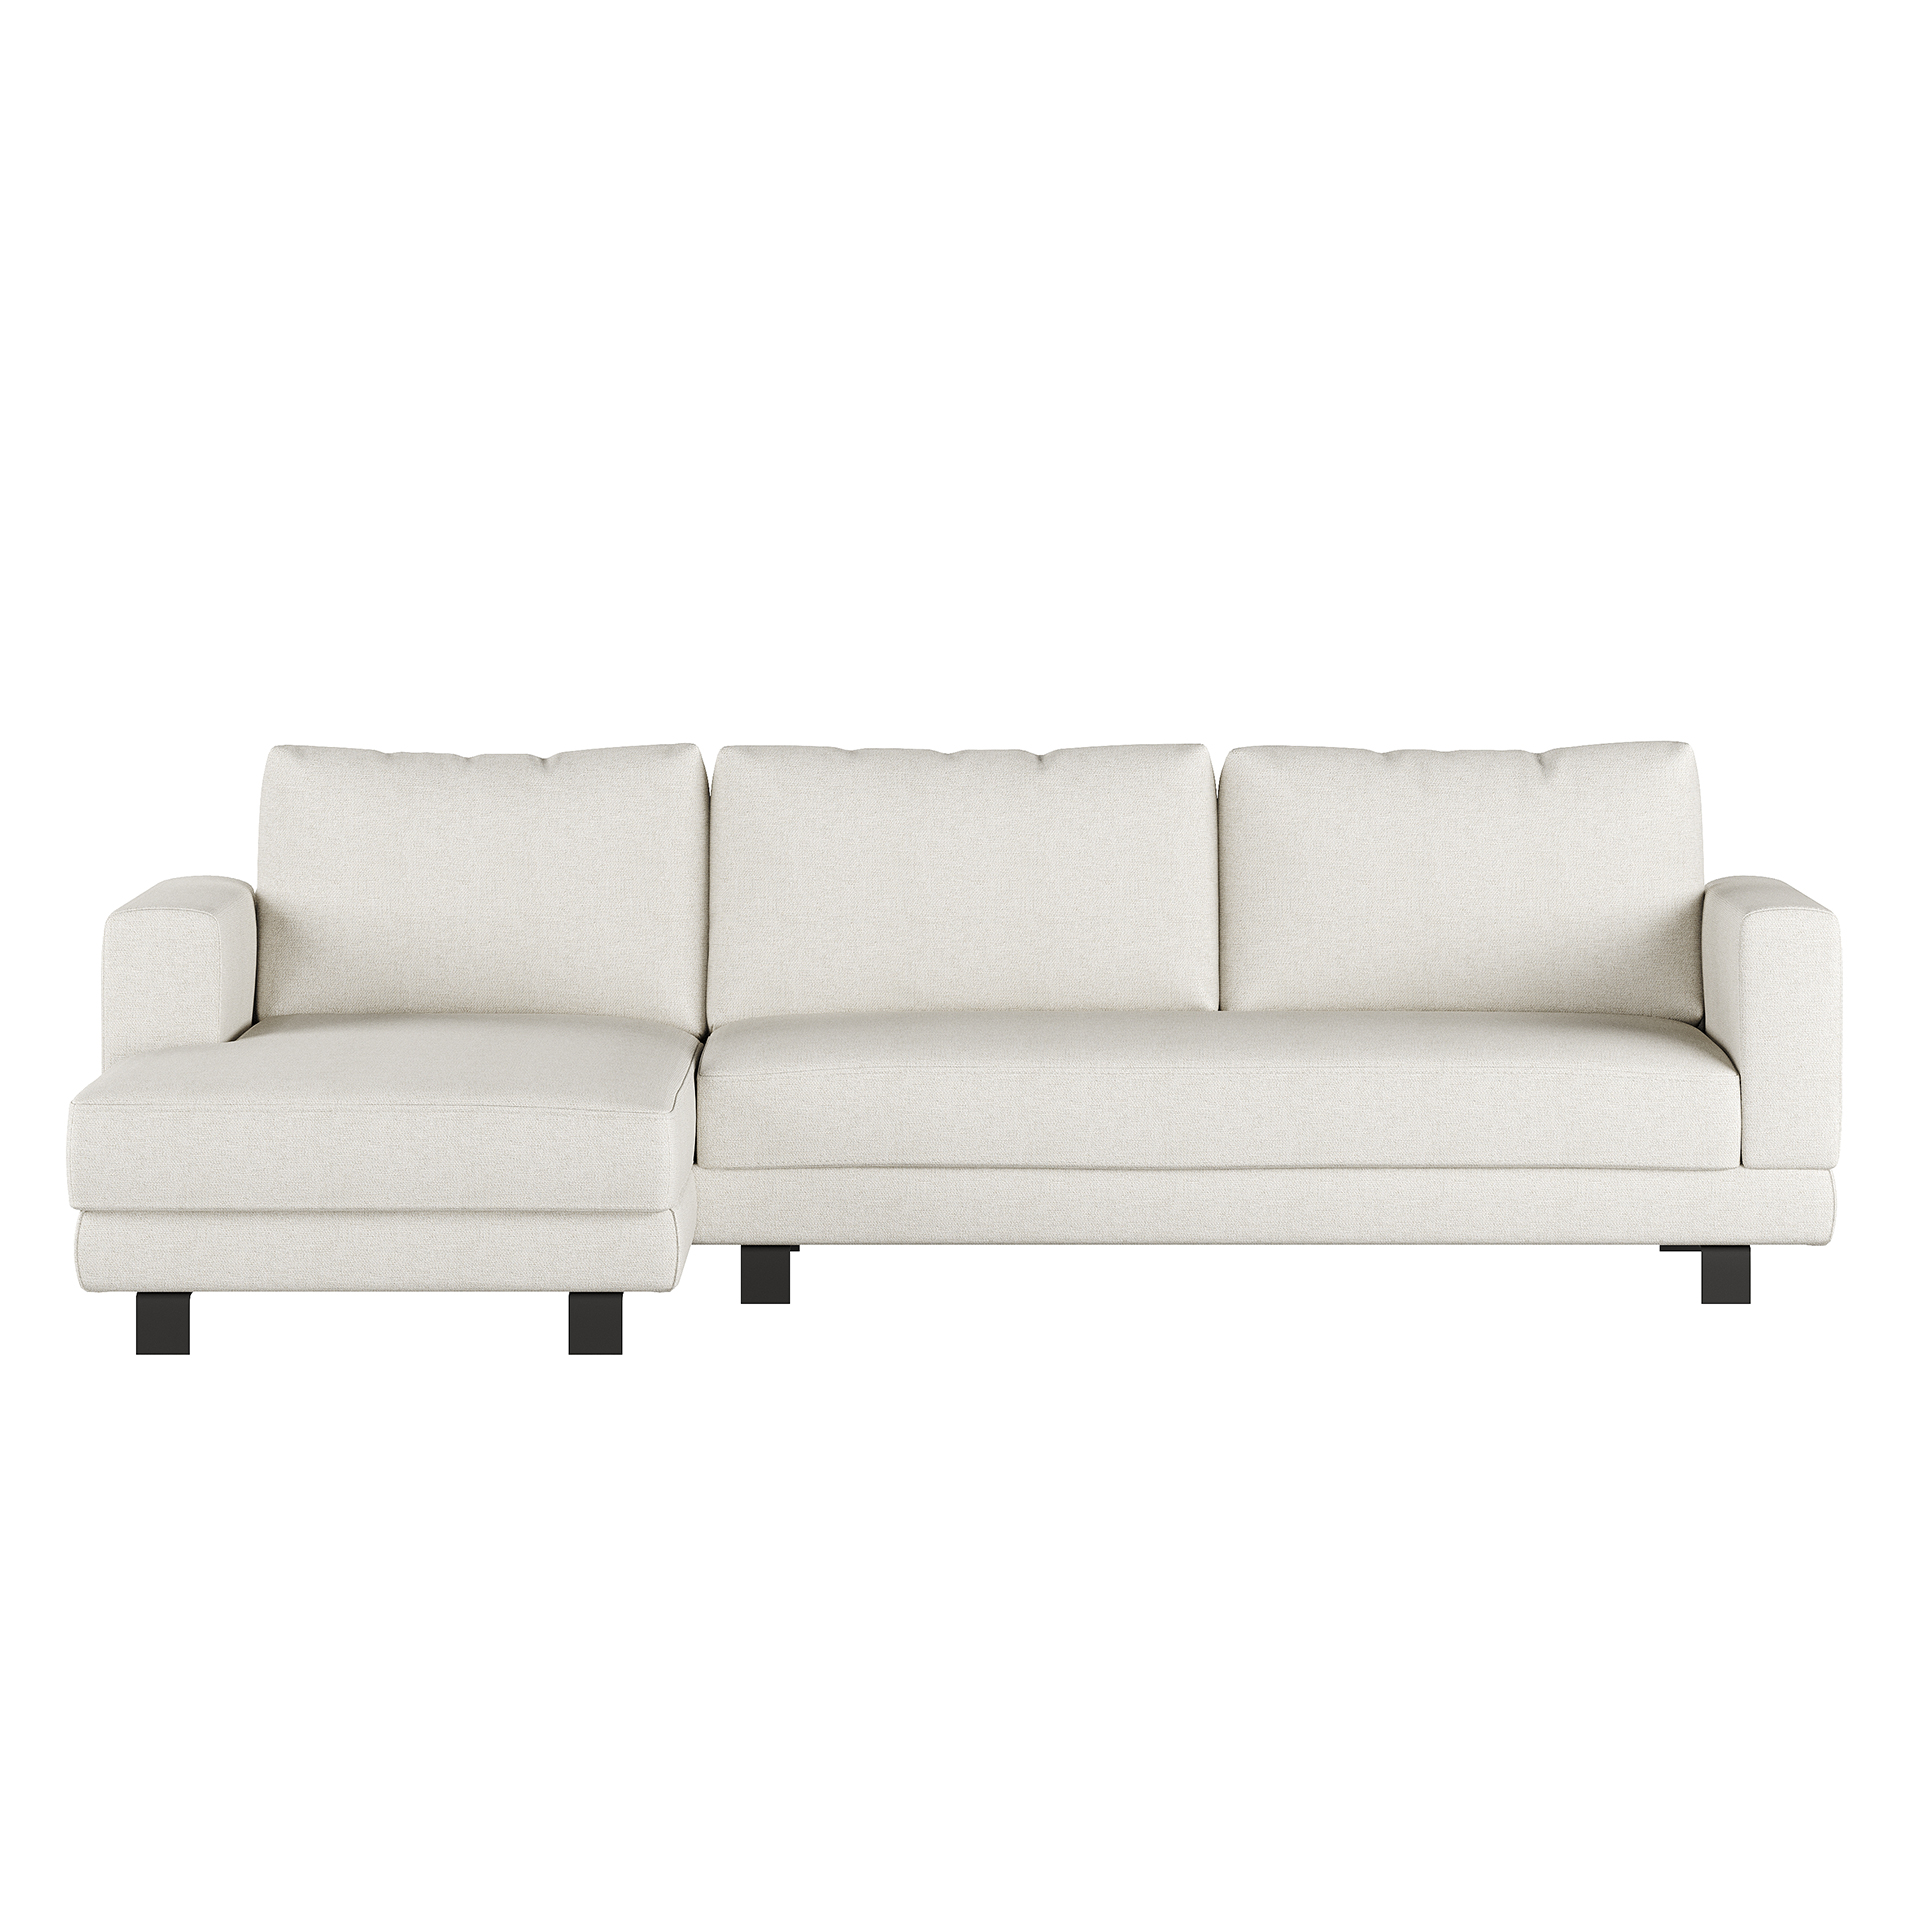 MILAN PEARL SOFA WITH CHAISE LONGUE